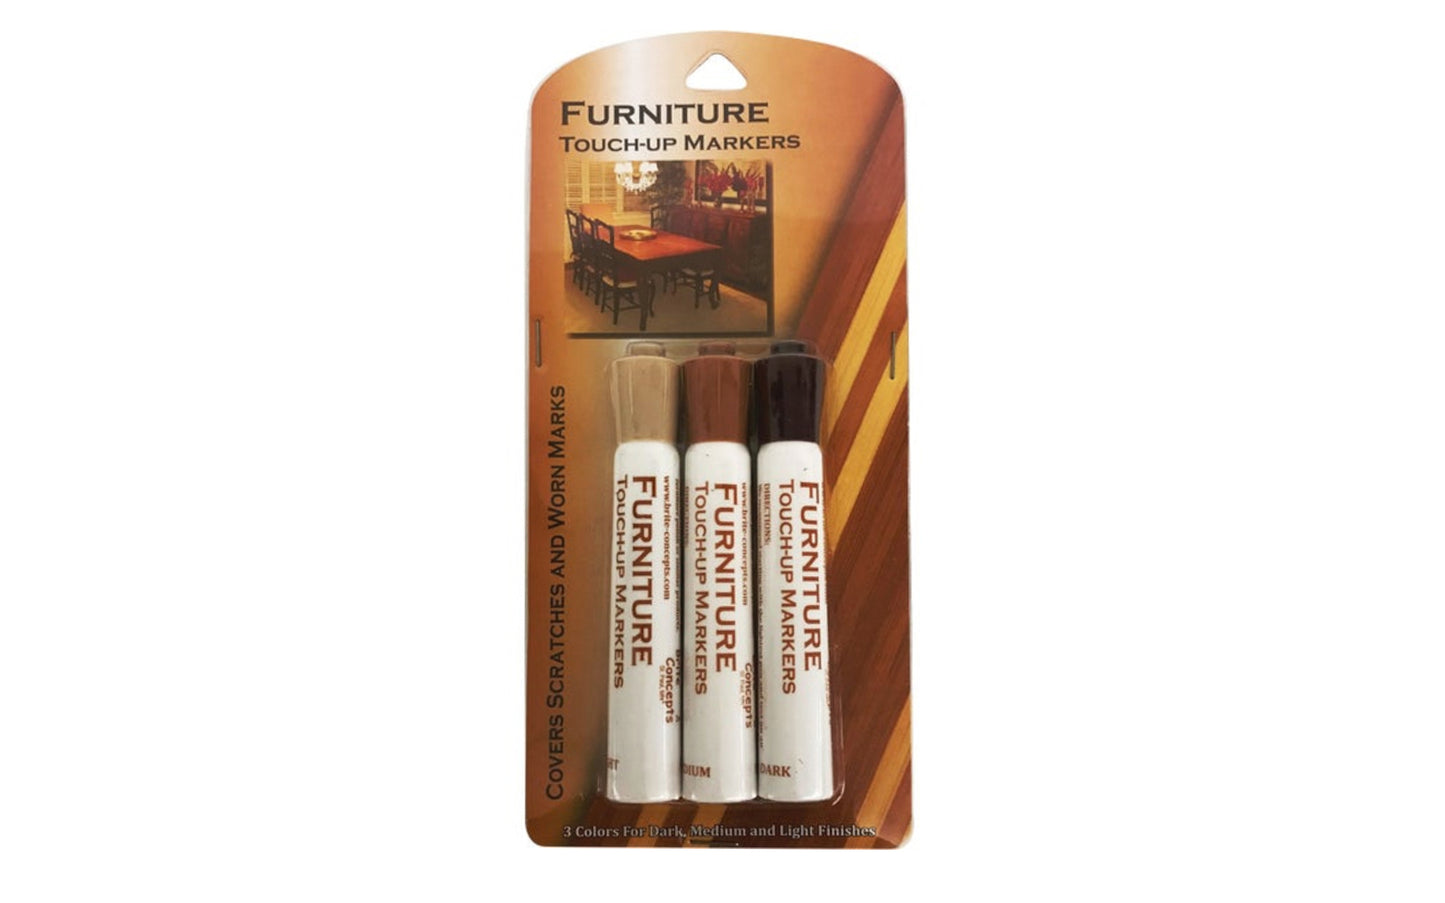 Furniture touch-up markers ideal for covering scratches & worn marks. Tough, colorfast formula dries to the touch in seconds. Includes 3 different colors for dark, medium, & light finishes.  Made by Jacent.